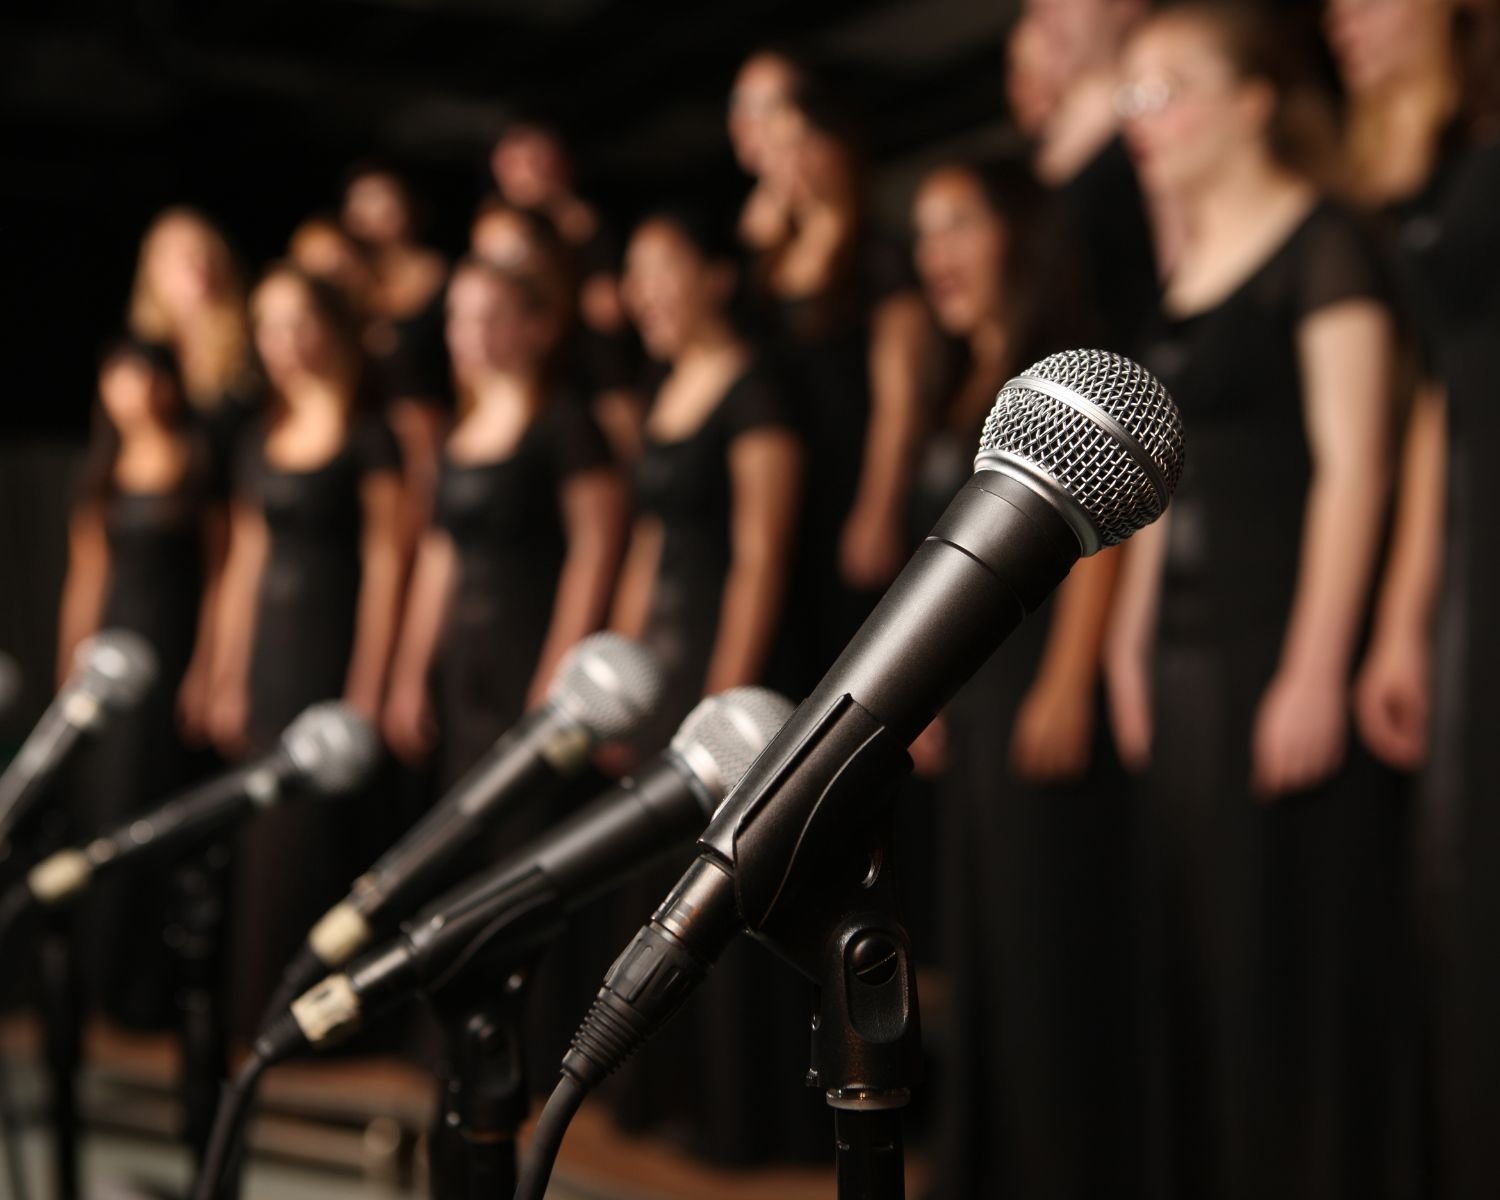 How are voices classified in a choir? 